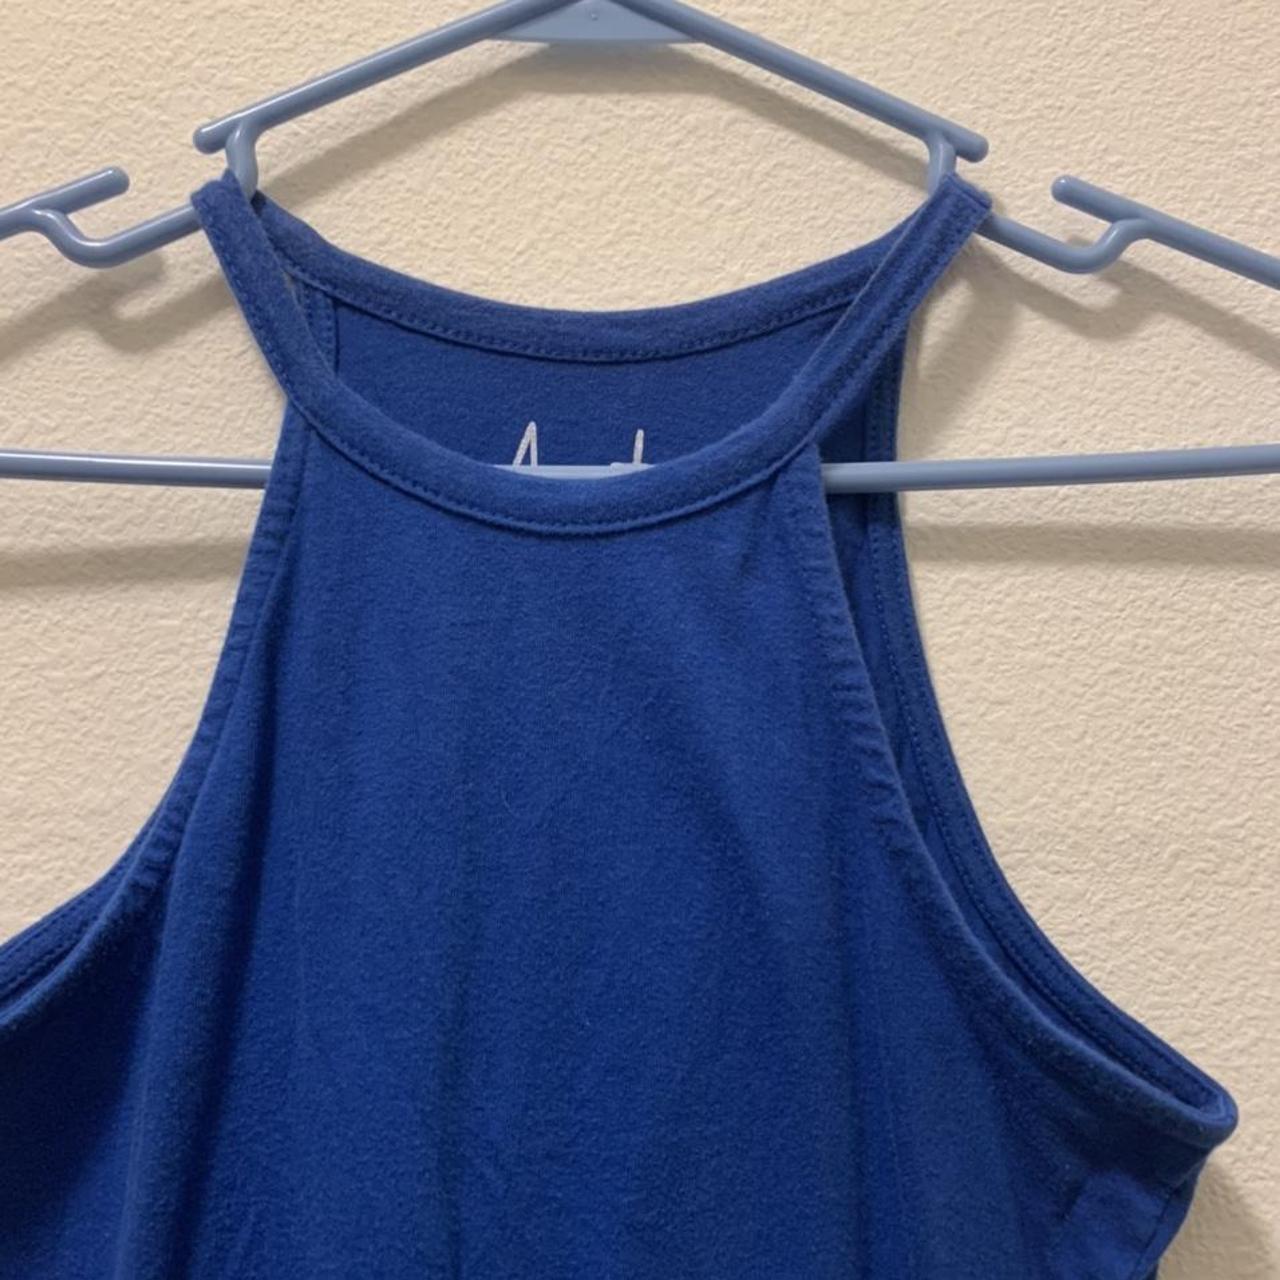 Product Image 2 - Blue High Neck Tank Top

Size